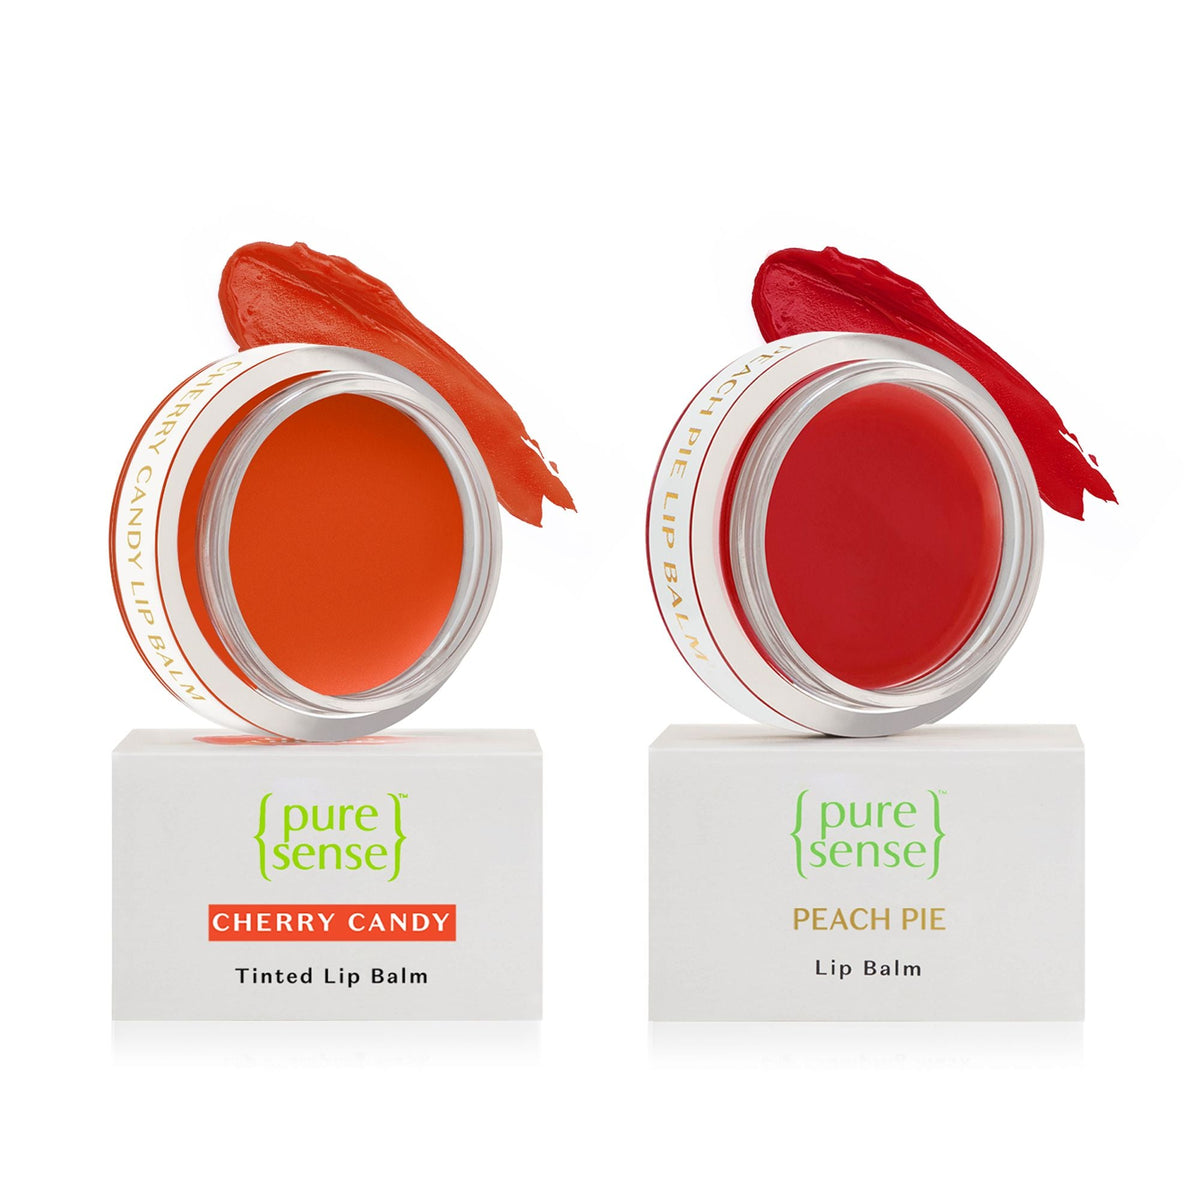 [CRED] Cherry Candy Tinted Lip Balm 5ml + Pure Sense Peach Pie Lip Balm 5ml | Pack of 2 | From the makers of Parachute Advansed | 10ml